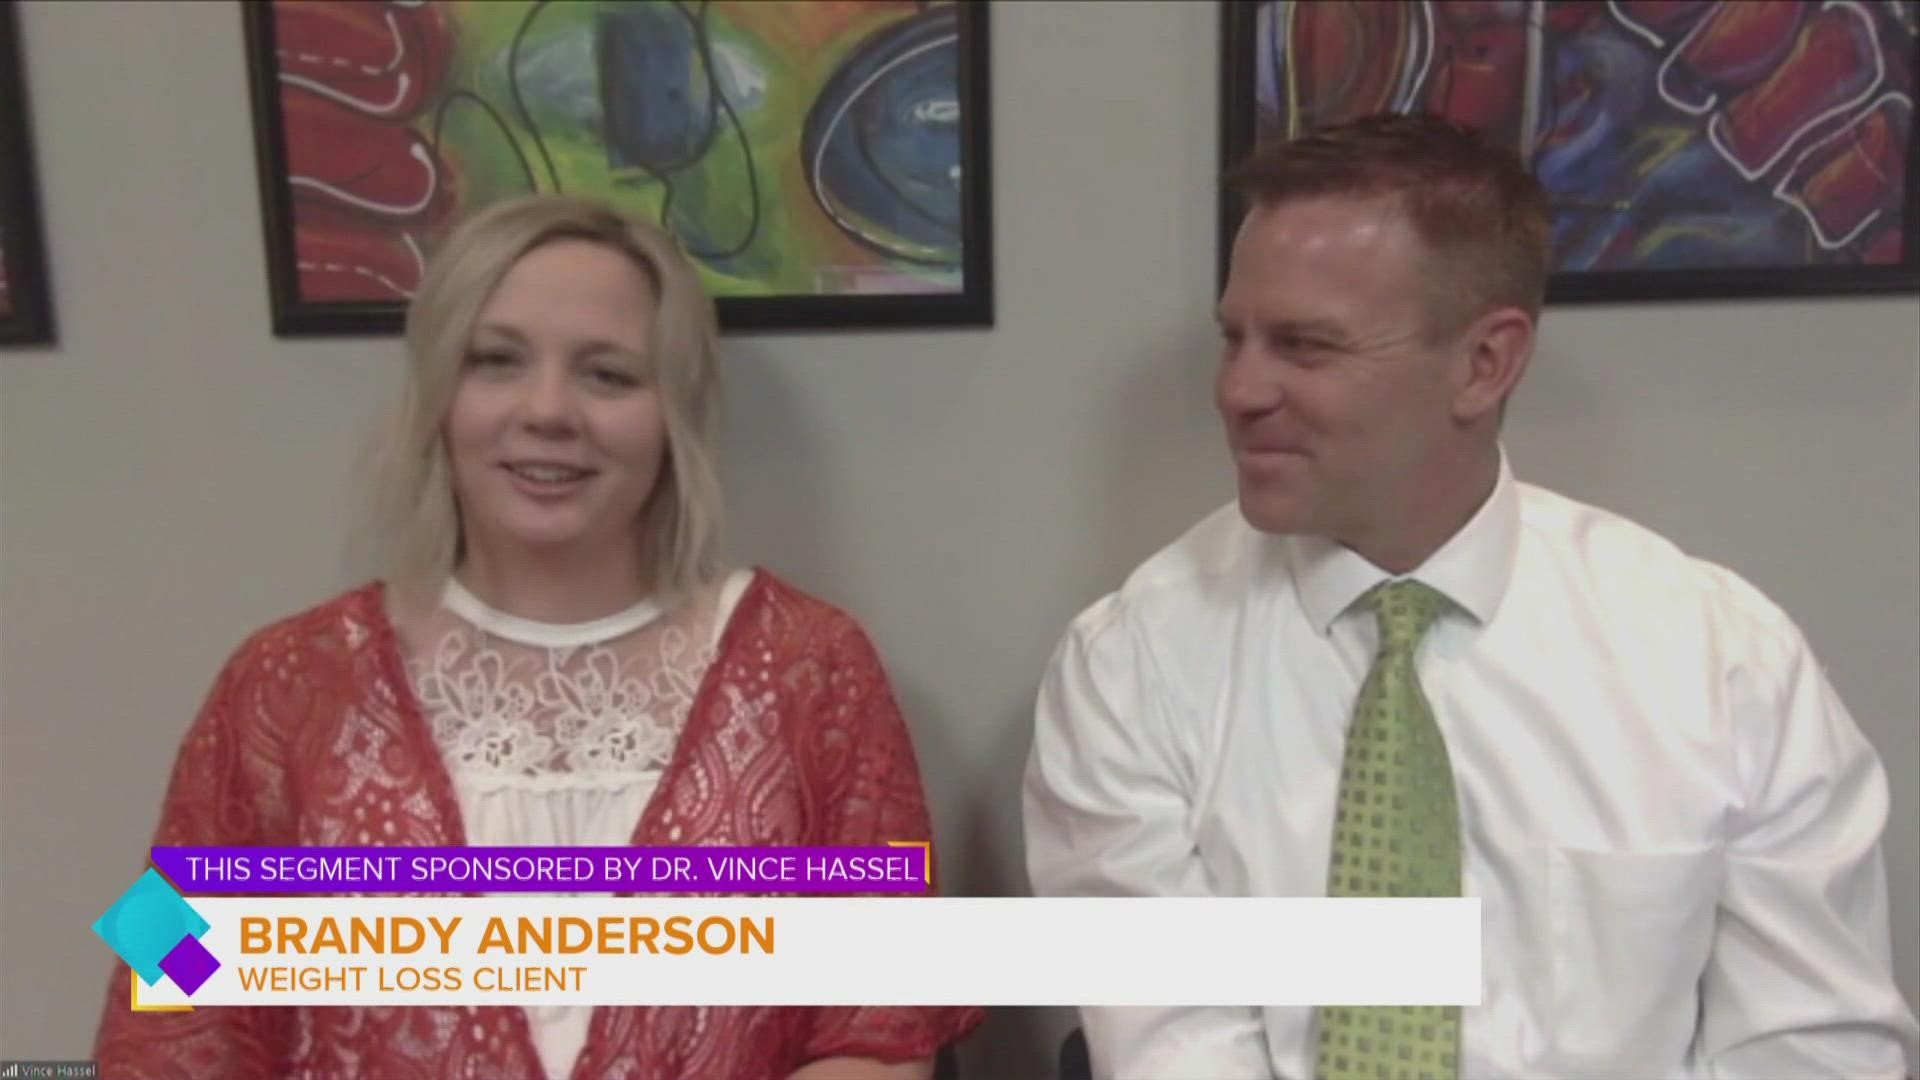 Dr. Vince Hassel client Brandy Anderson says she has continued to follow healthy lifestyle after completing program and continues to lose weight | Paid Content